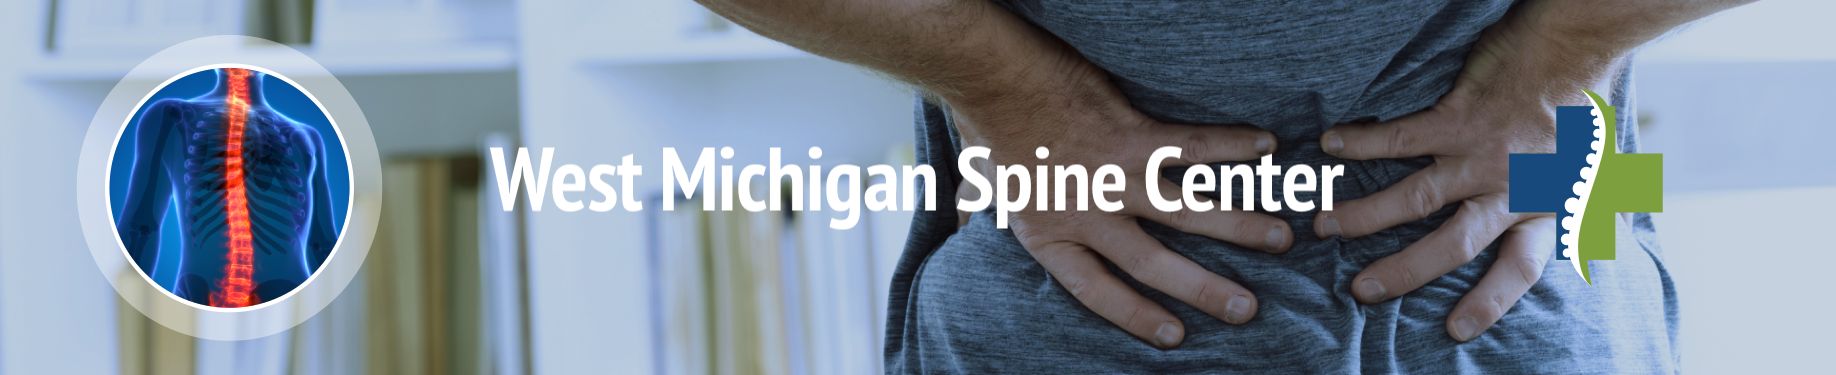 For all of your spine care needs in the Muskegon & Grand Haven, MI areas be sure to contact the experts at Orthopaedic Associates of Muskegon!